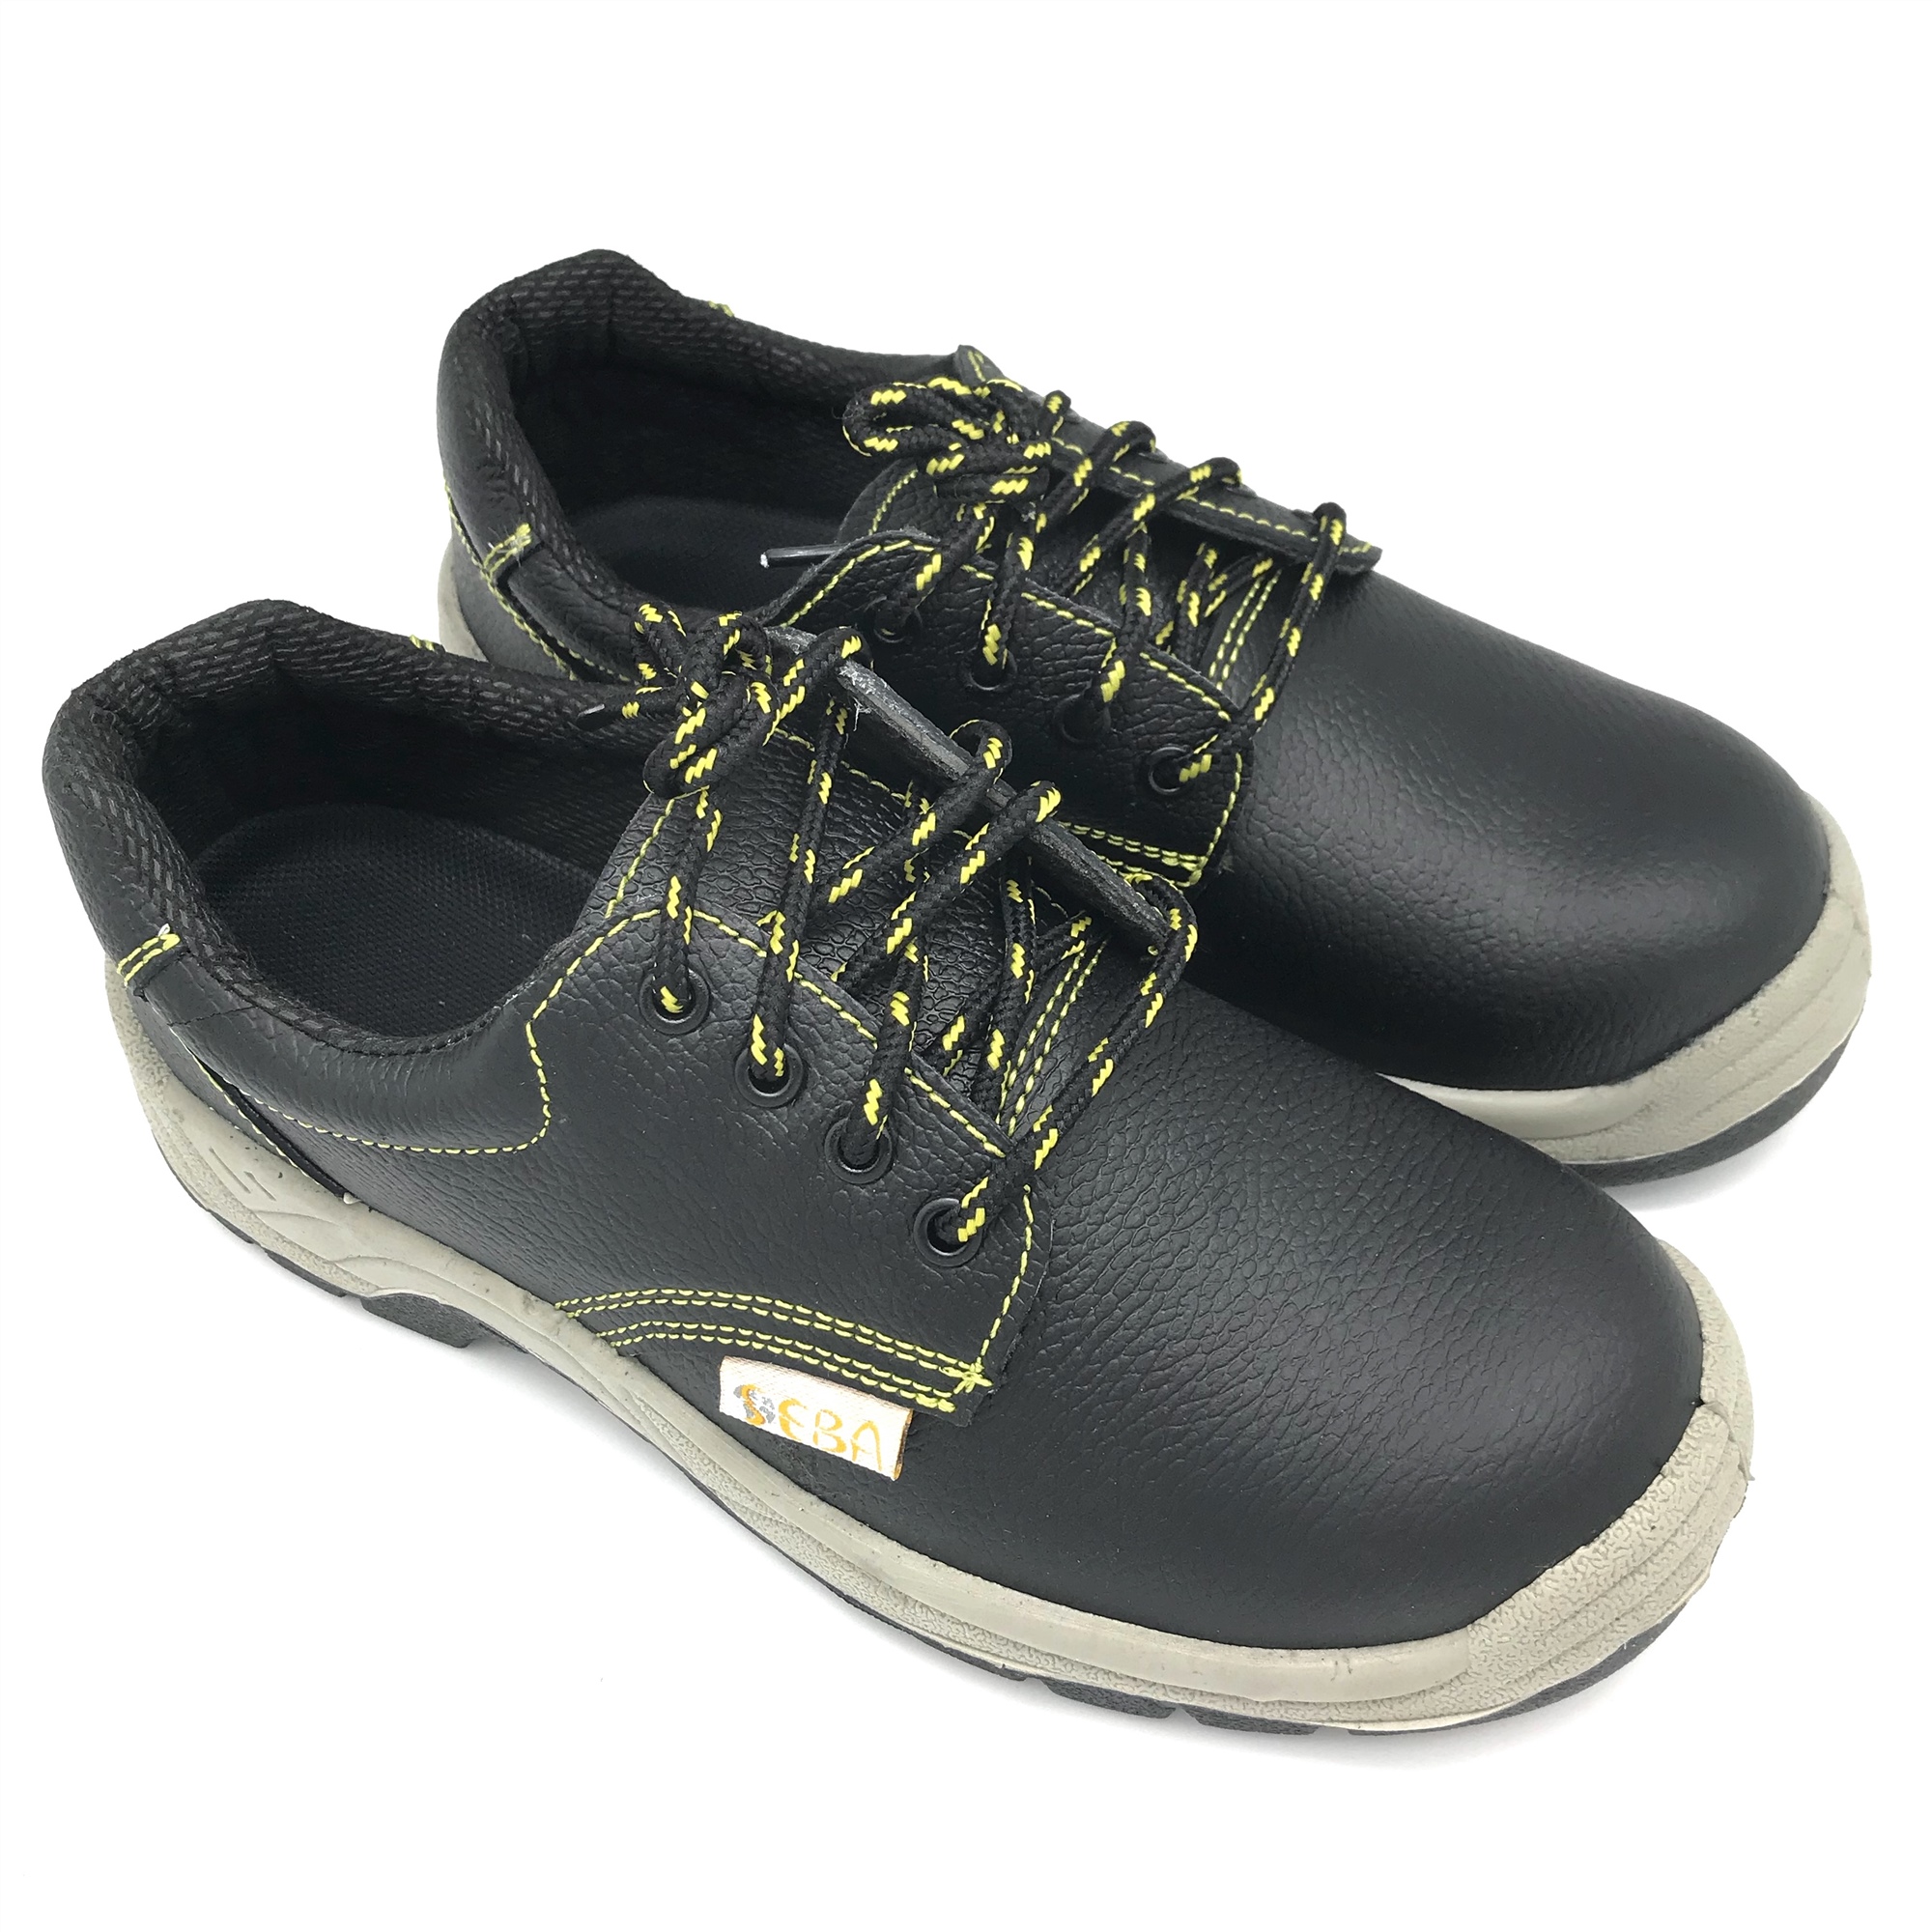 PU Outsole Material and Unisex Gender protective safety shoes